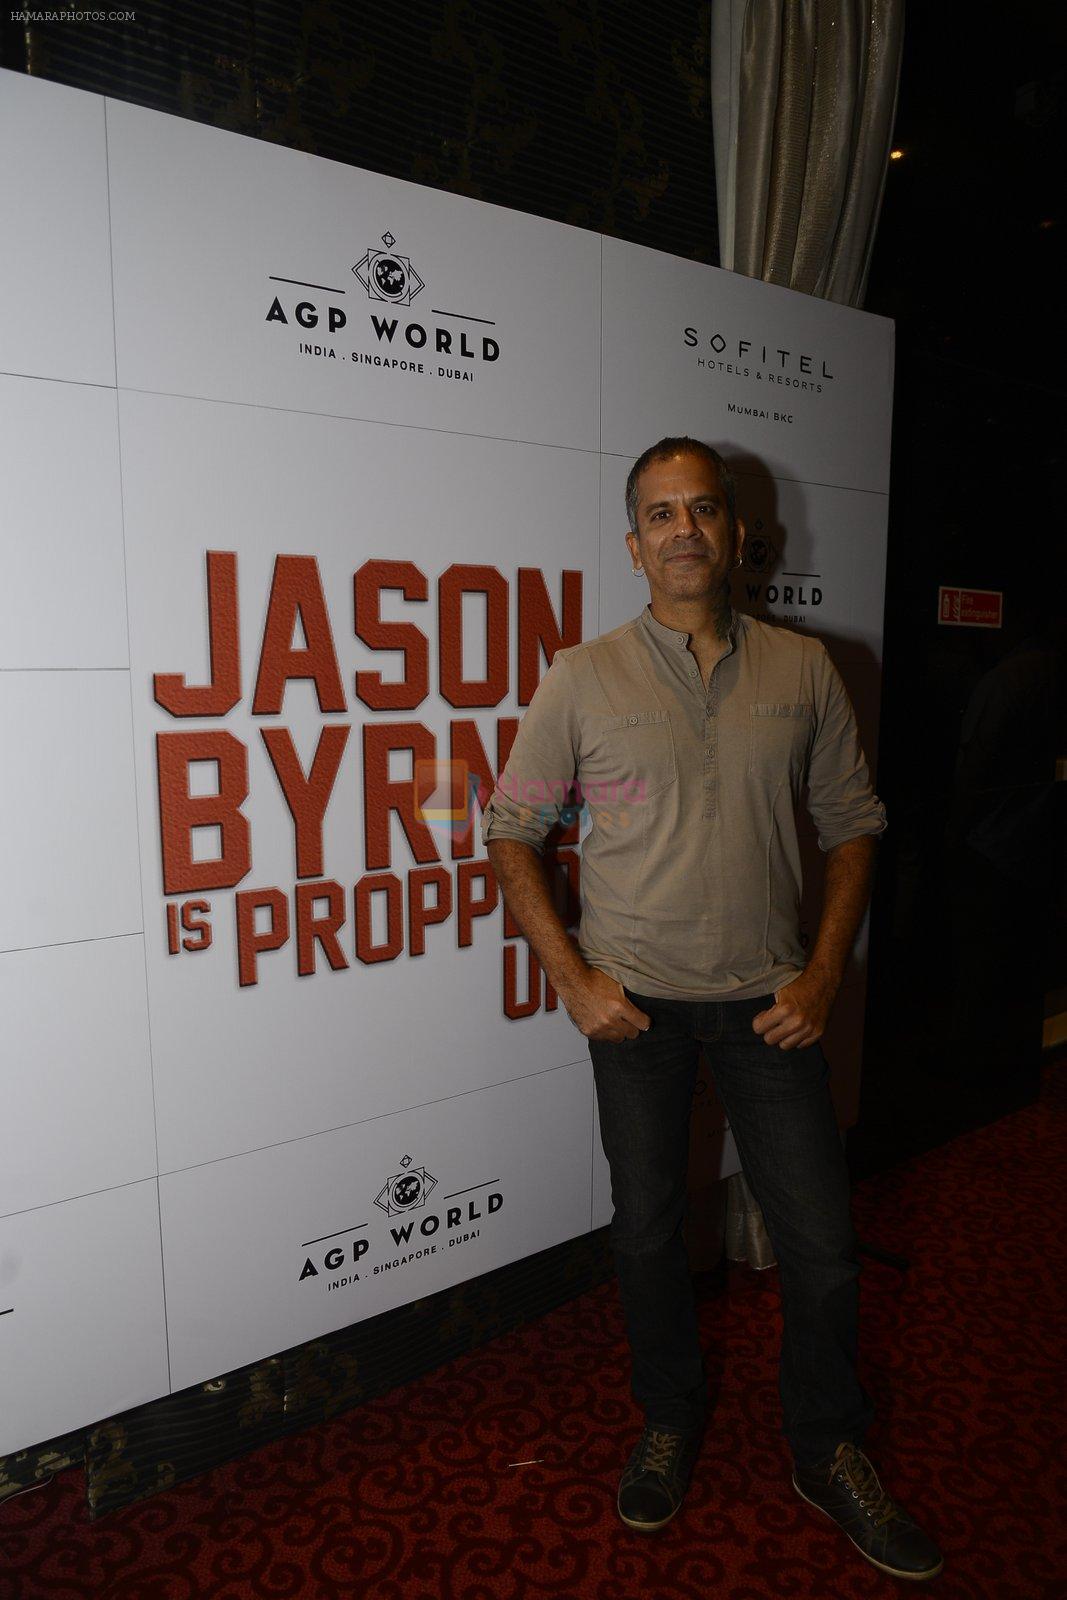 at Jason Byrne stand up comedian's premiere show on 15th Sept 2016